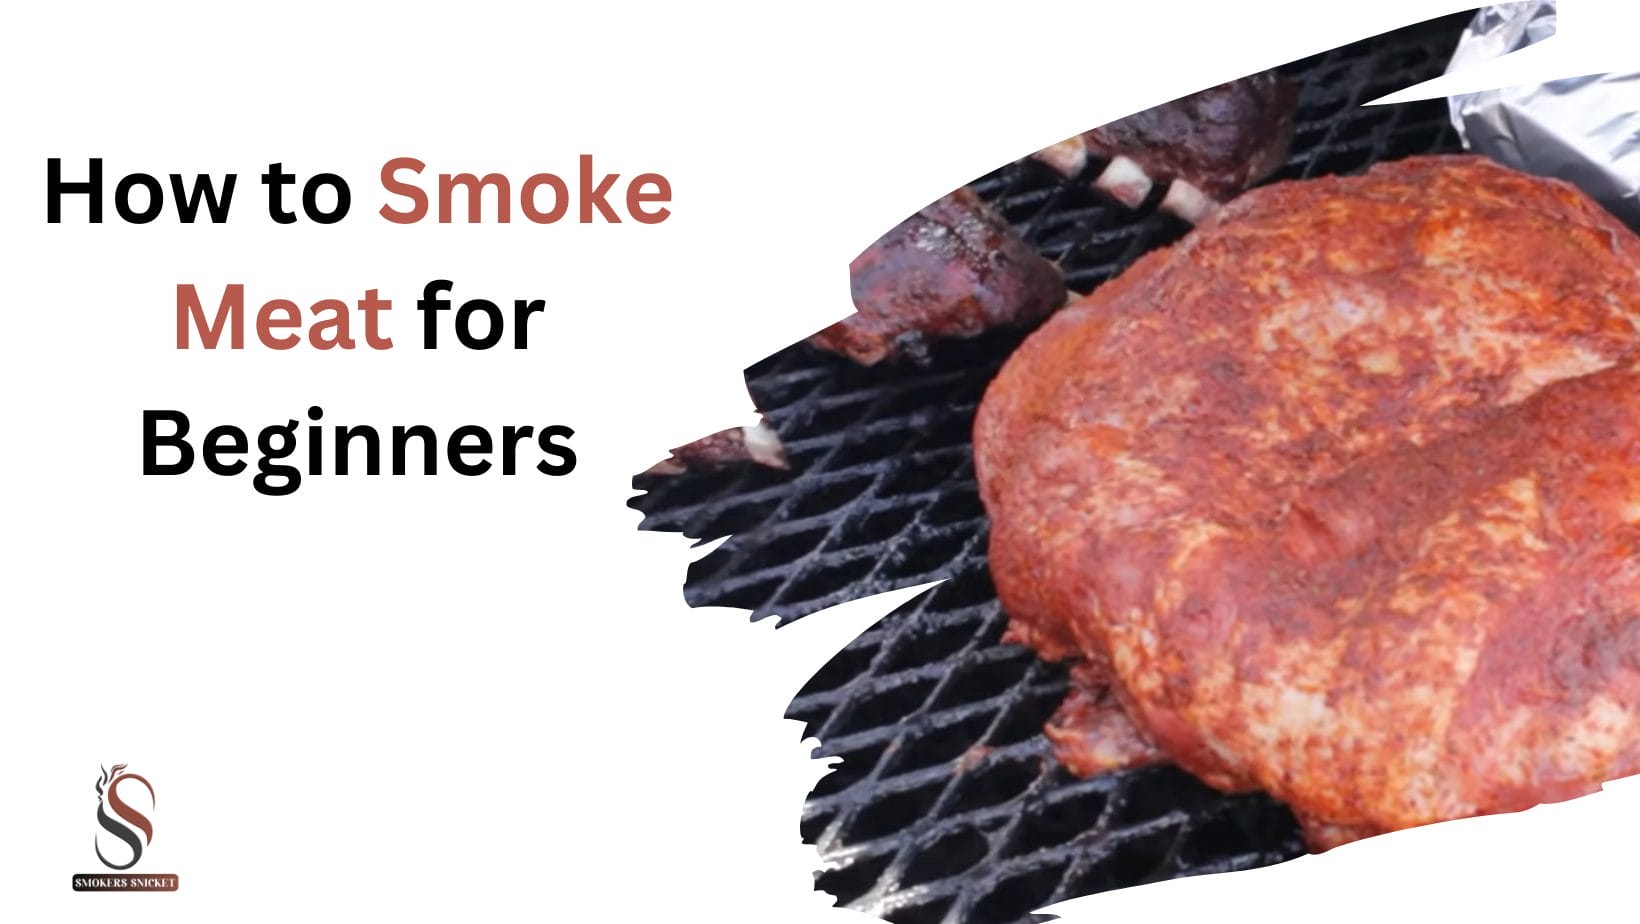 How-to-Smoke-Meat-for-Beginners